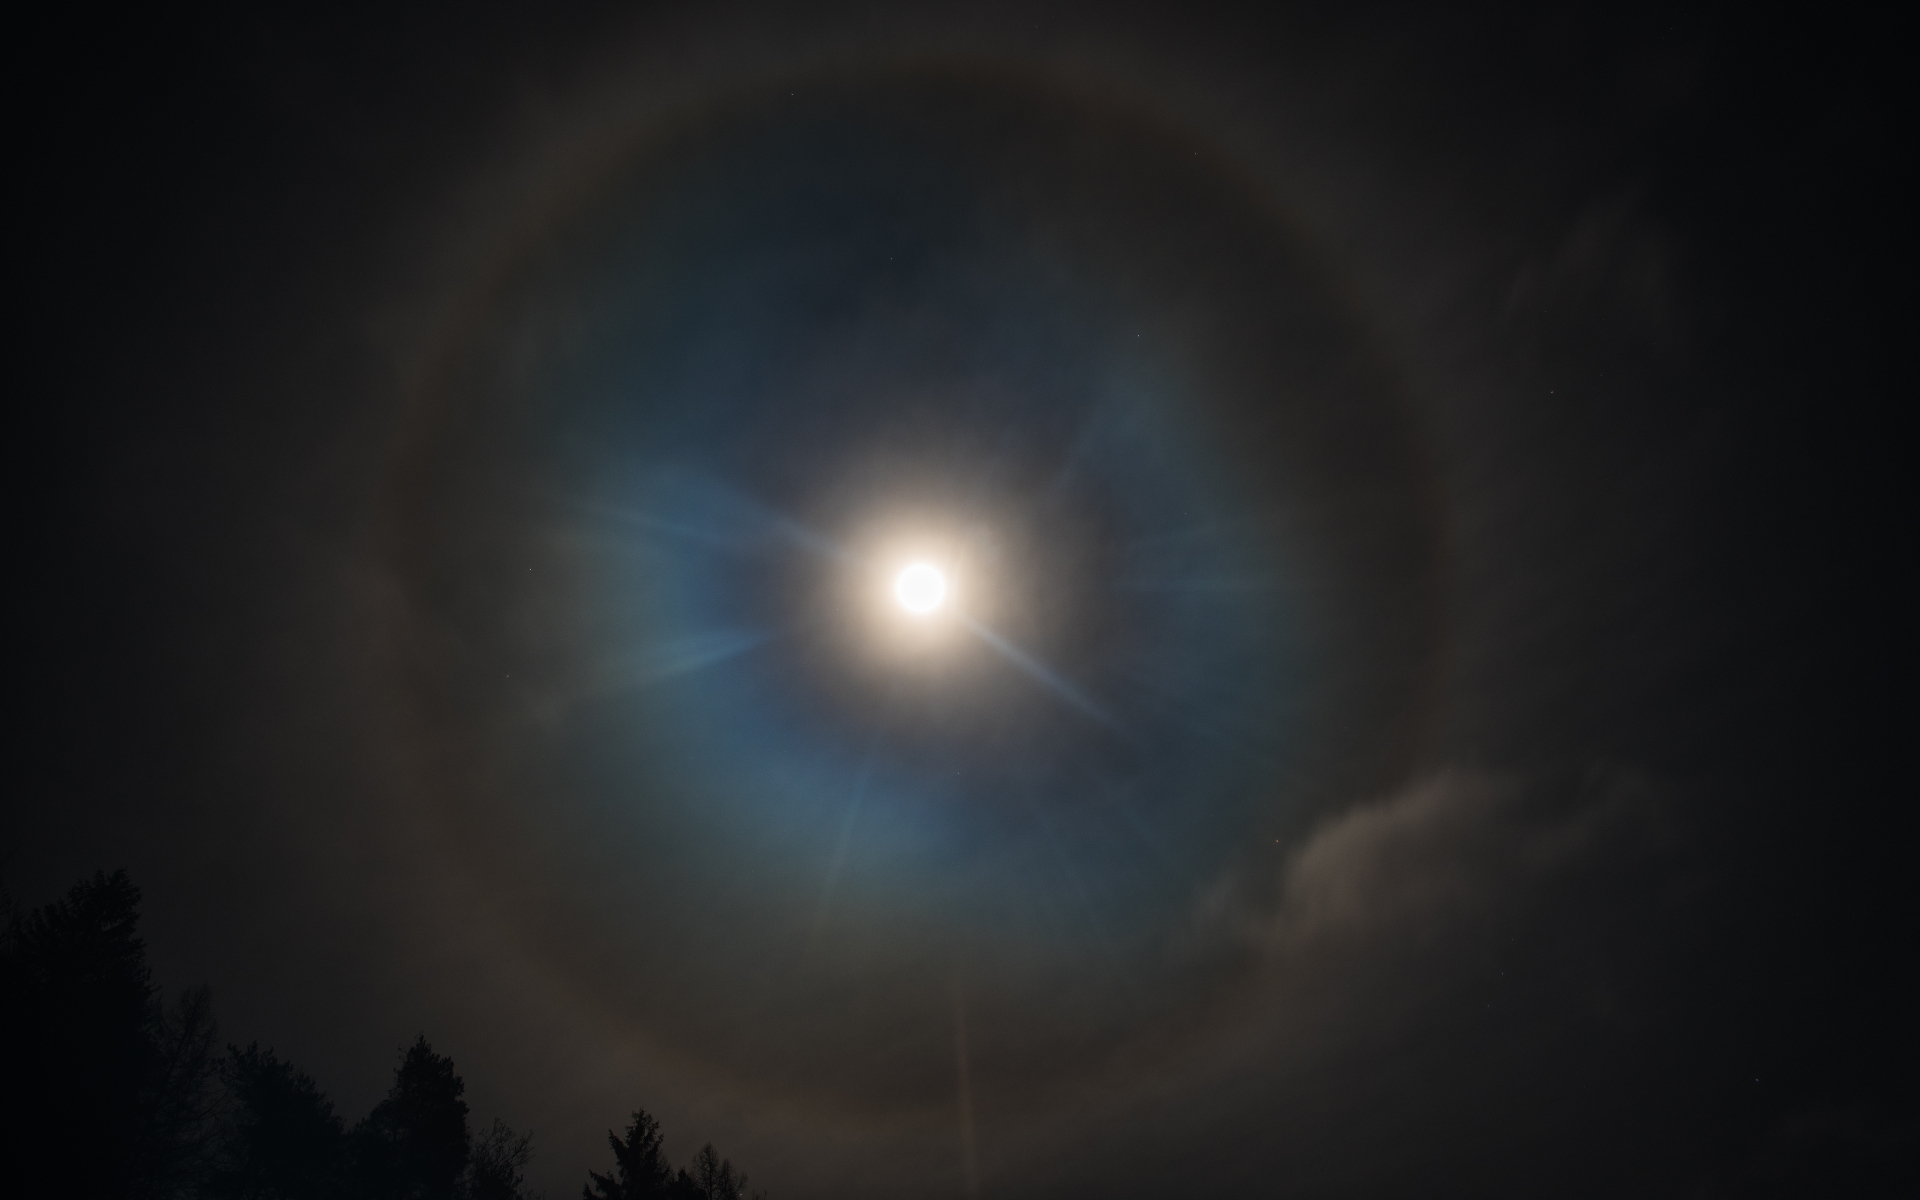 A ring of light forms a halo around the moon.